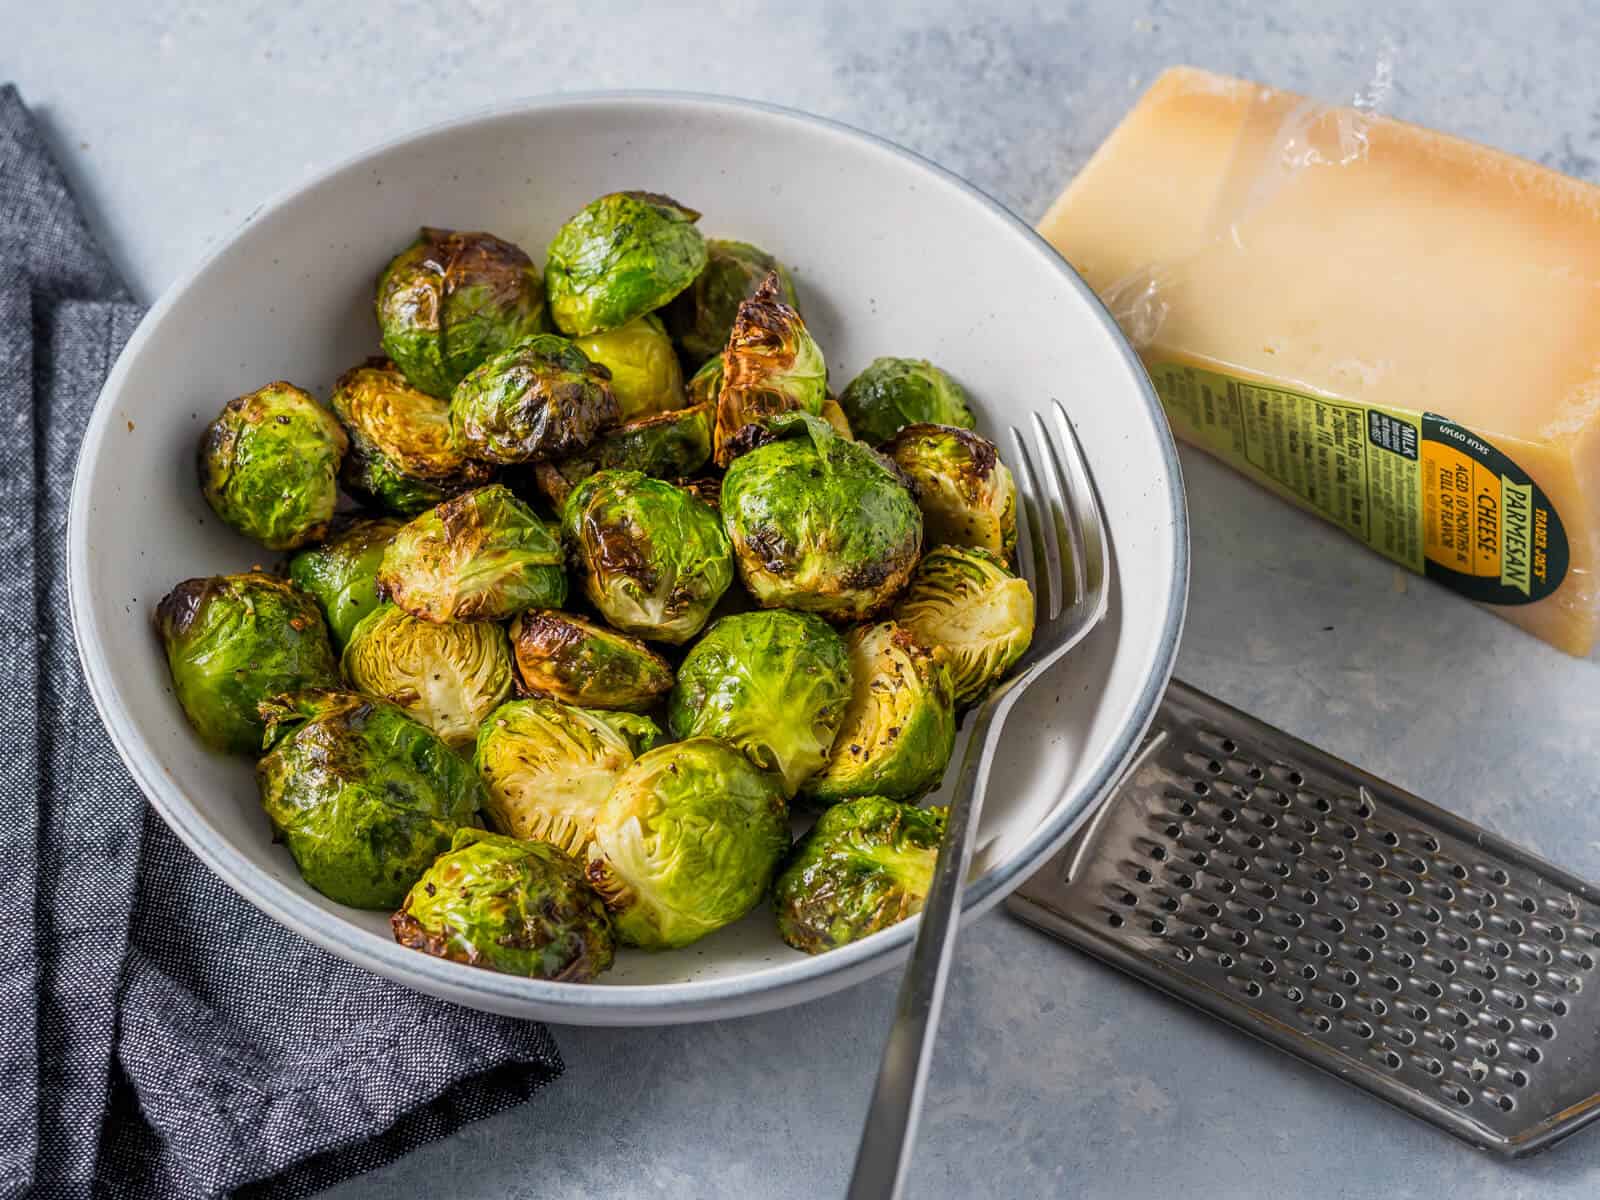 This air fryer Brussels sprouts recipe is the easiest and most flavorful way to prepare this classic and healthy side dish! Ready in 15 mins.